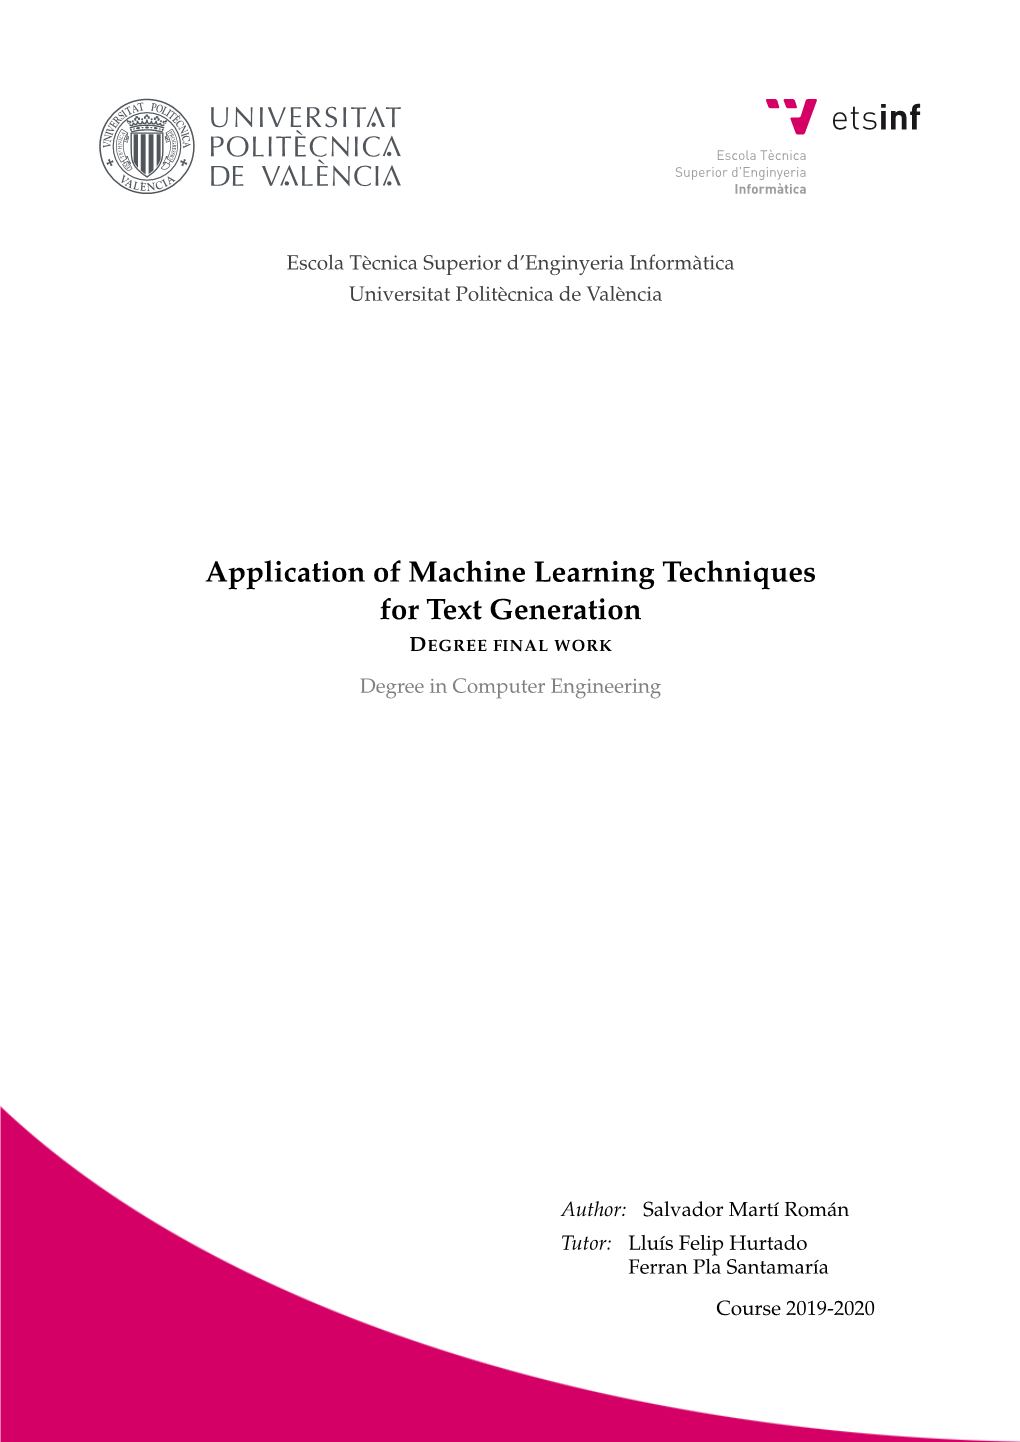 Application of Machine Learning Techniques for Text Generation DEGREE FINAL WORK